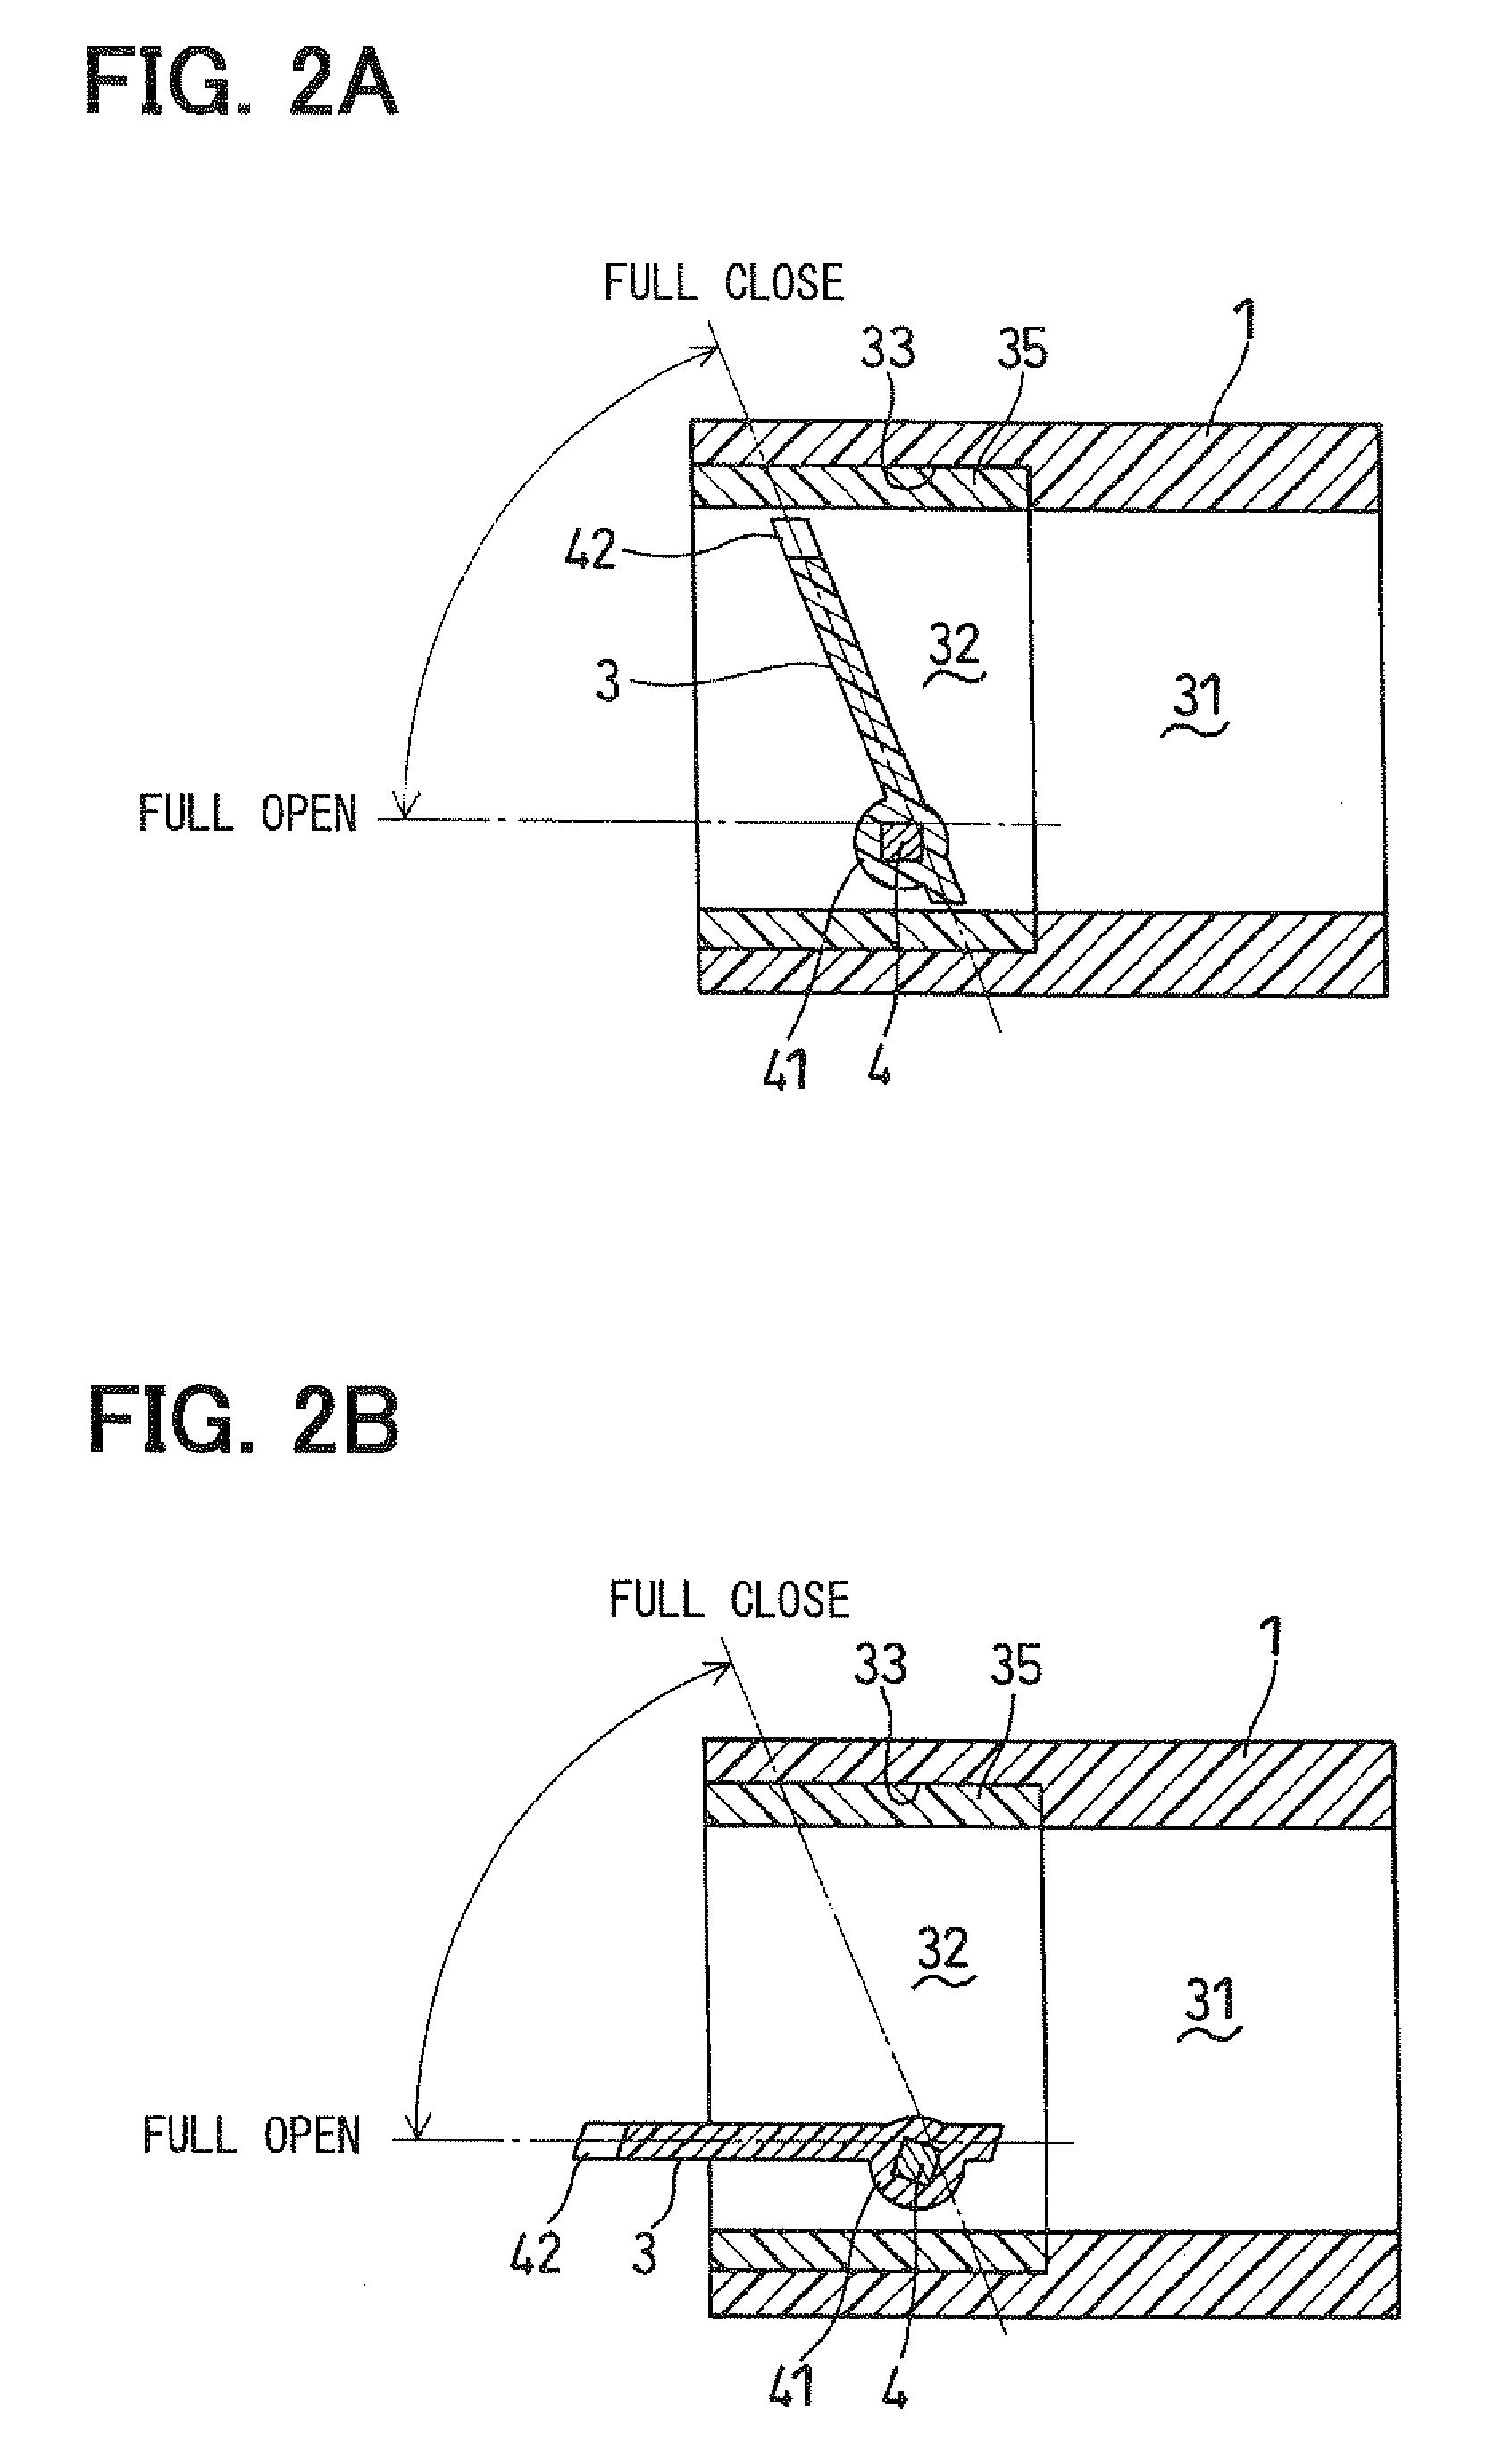 Intake controller for internal combustion engine